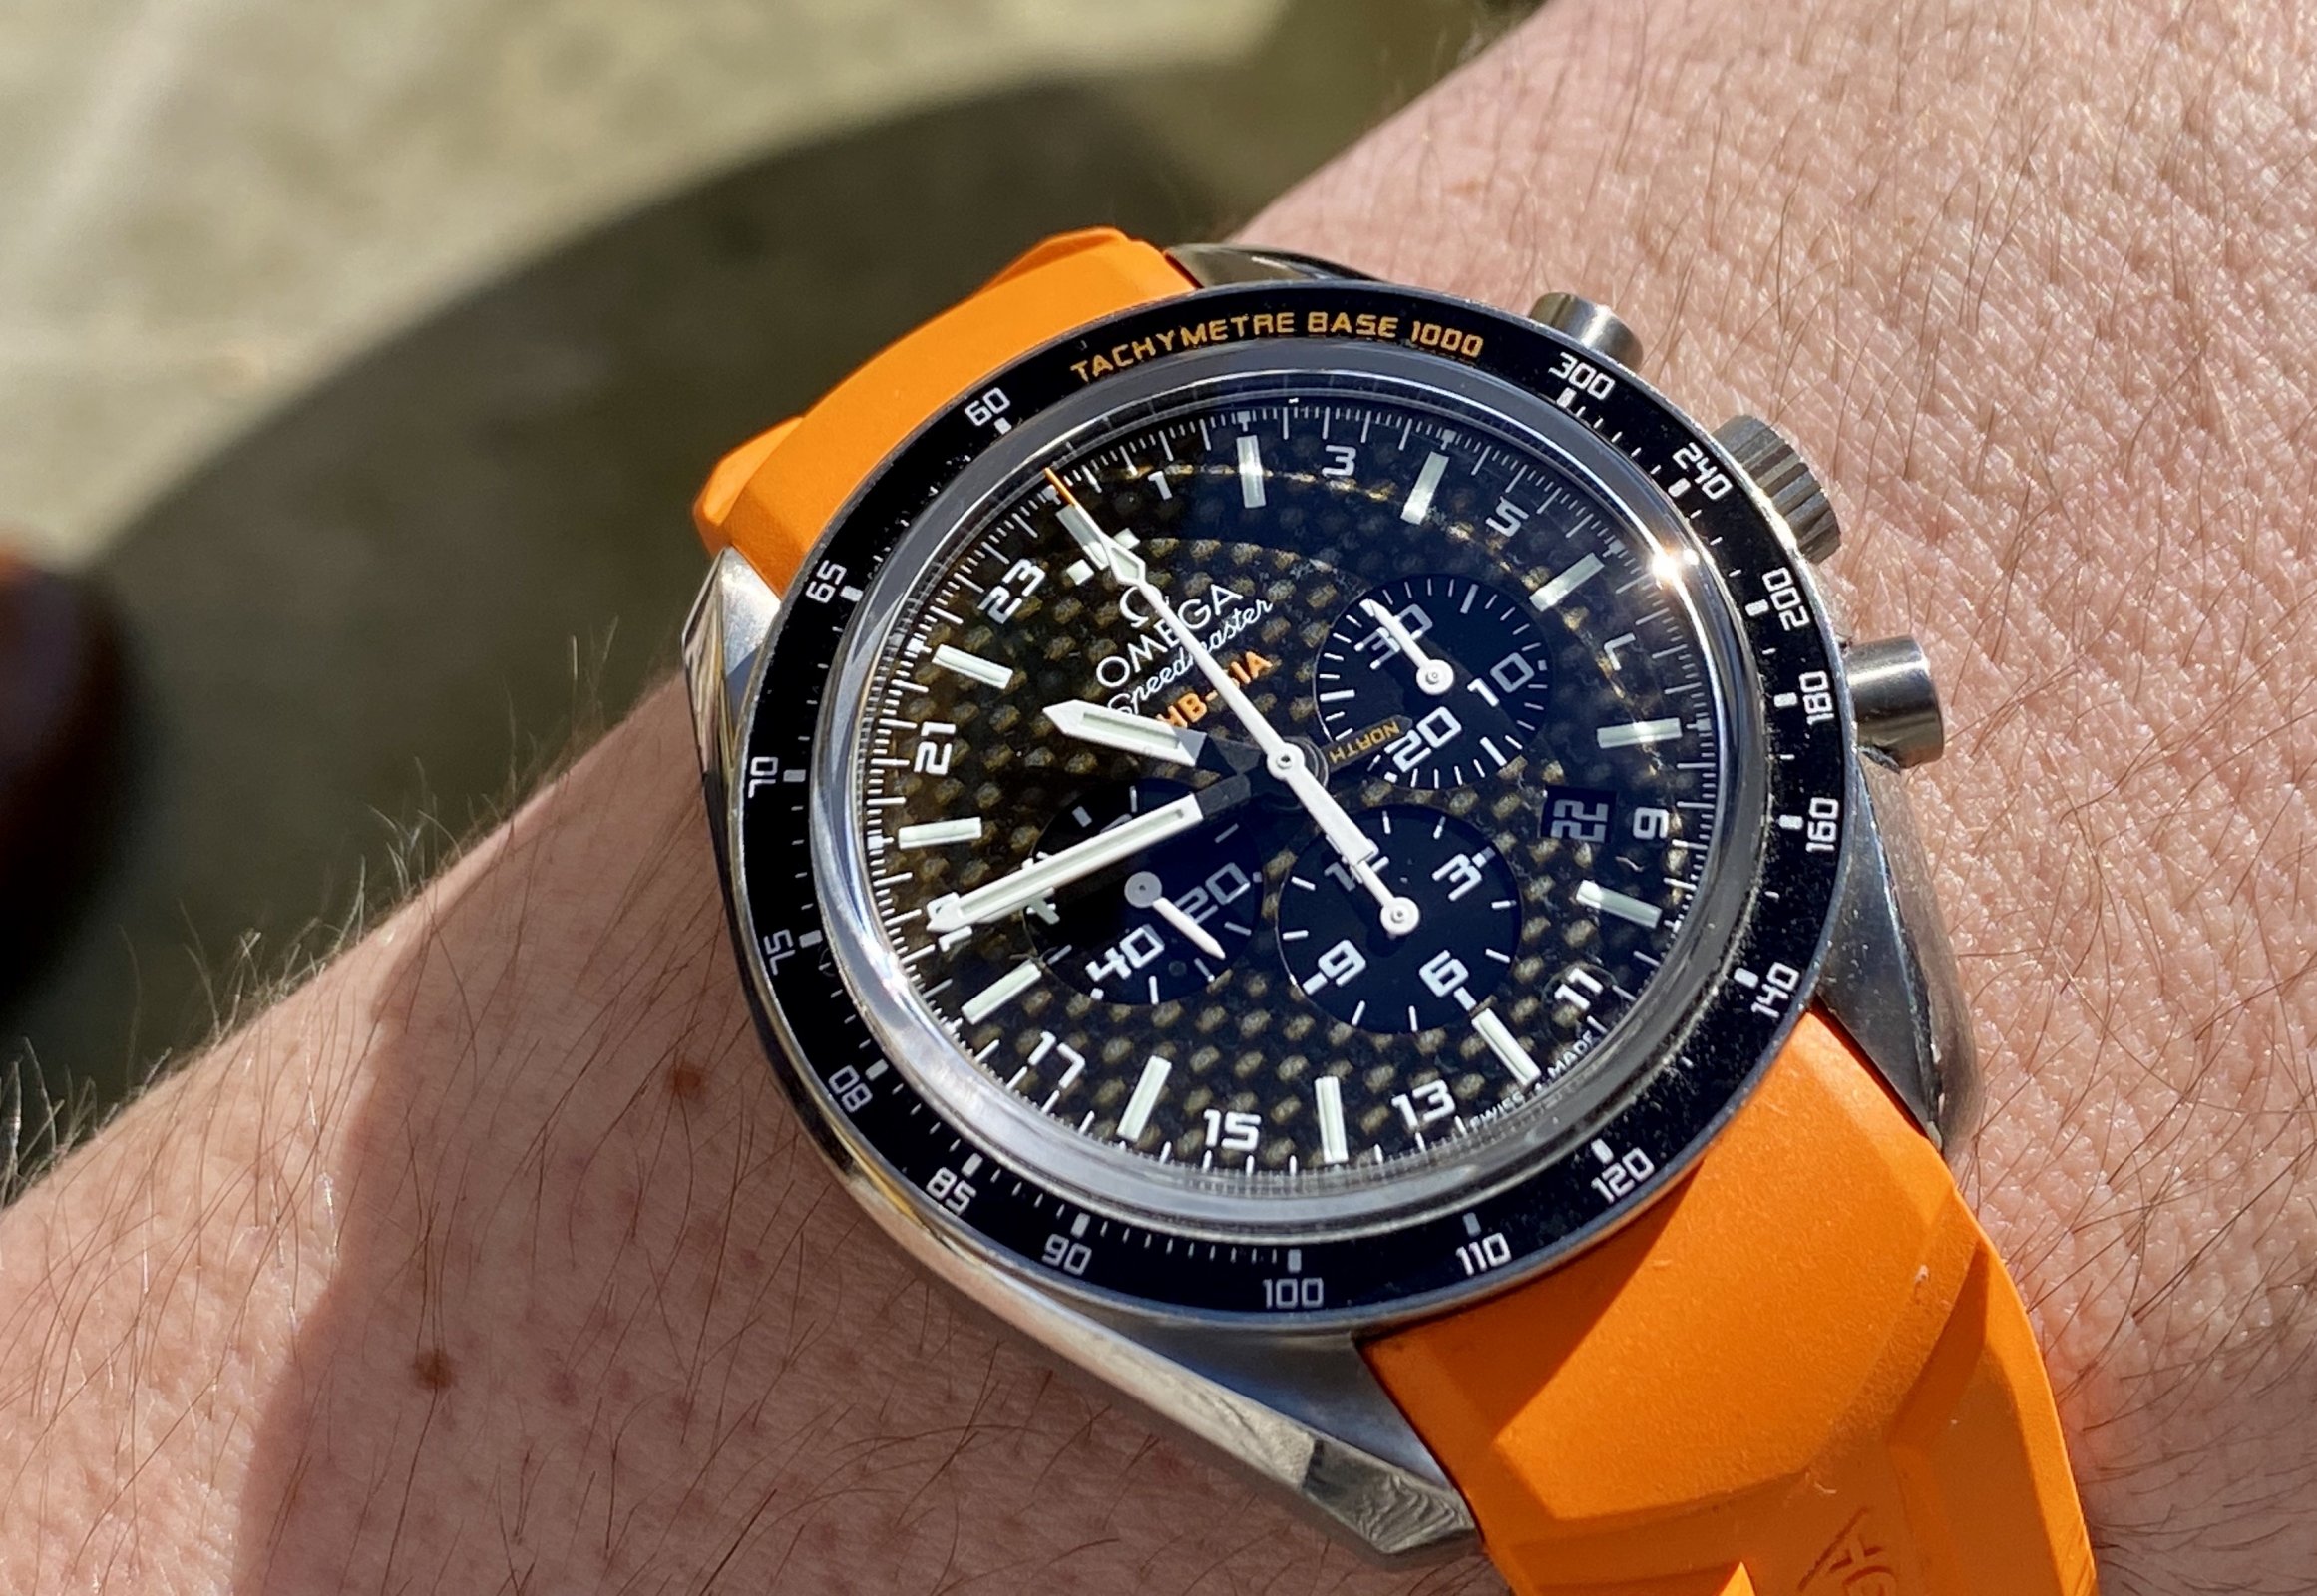 Replica Omega Speedmaster HB-SIA Co-axial GMT Chronograph Watch